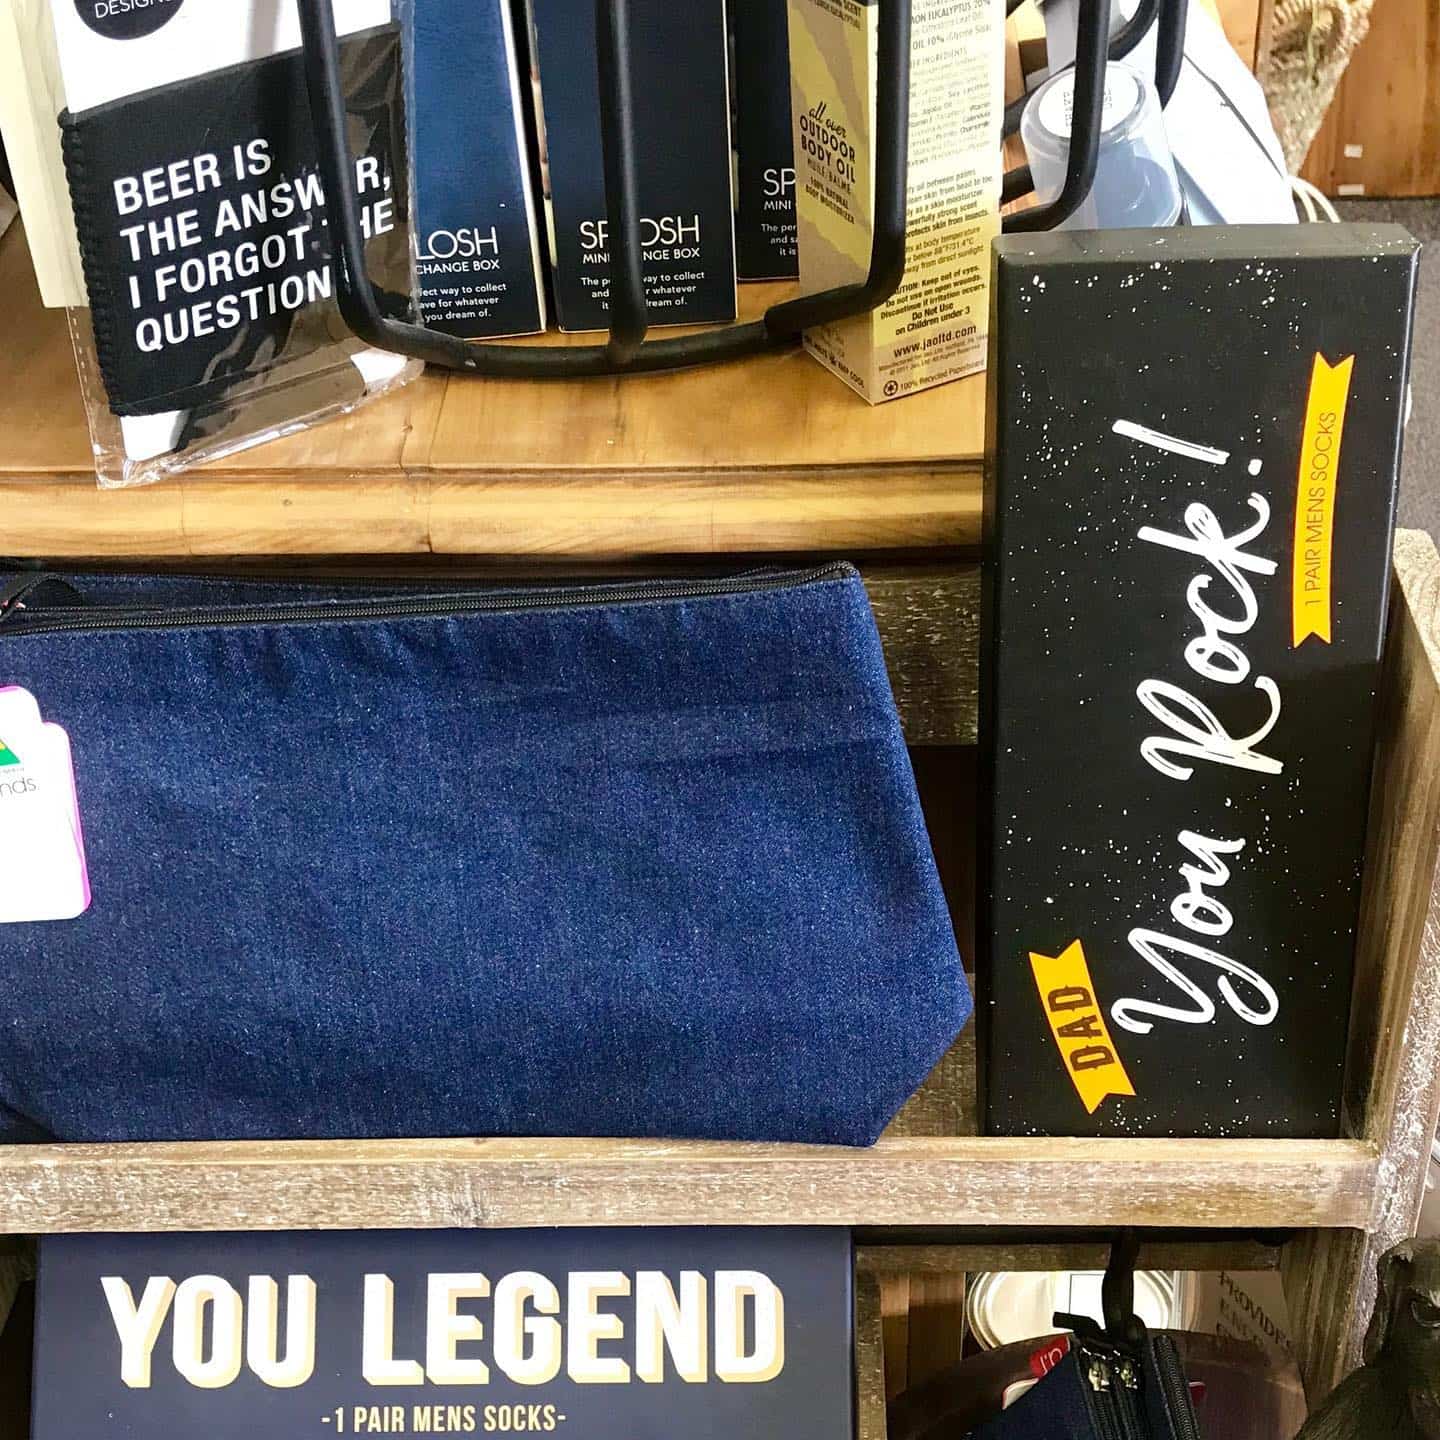 Men's Socks And Denim Purse In Store — Men's Gifts In Central Highlands, QLD